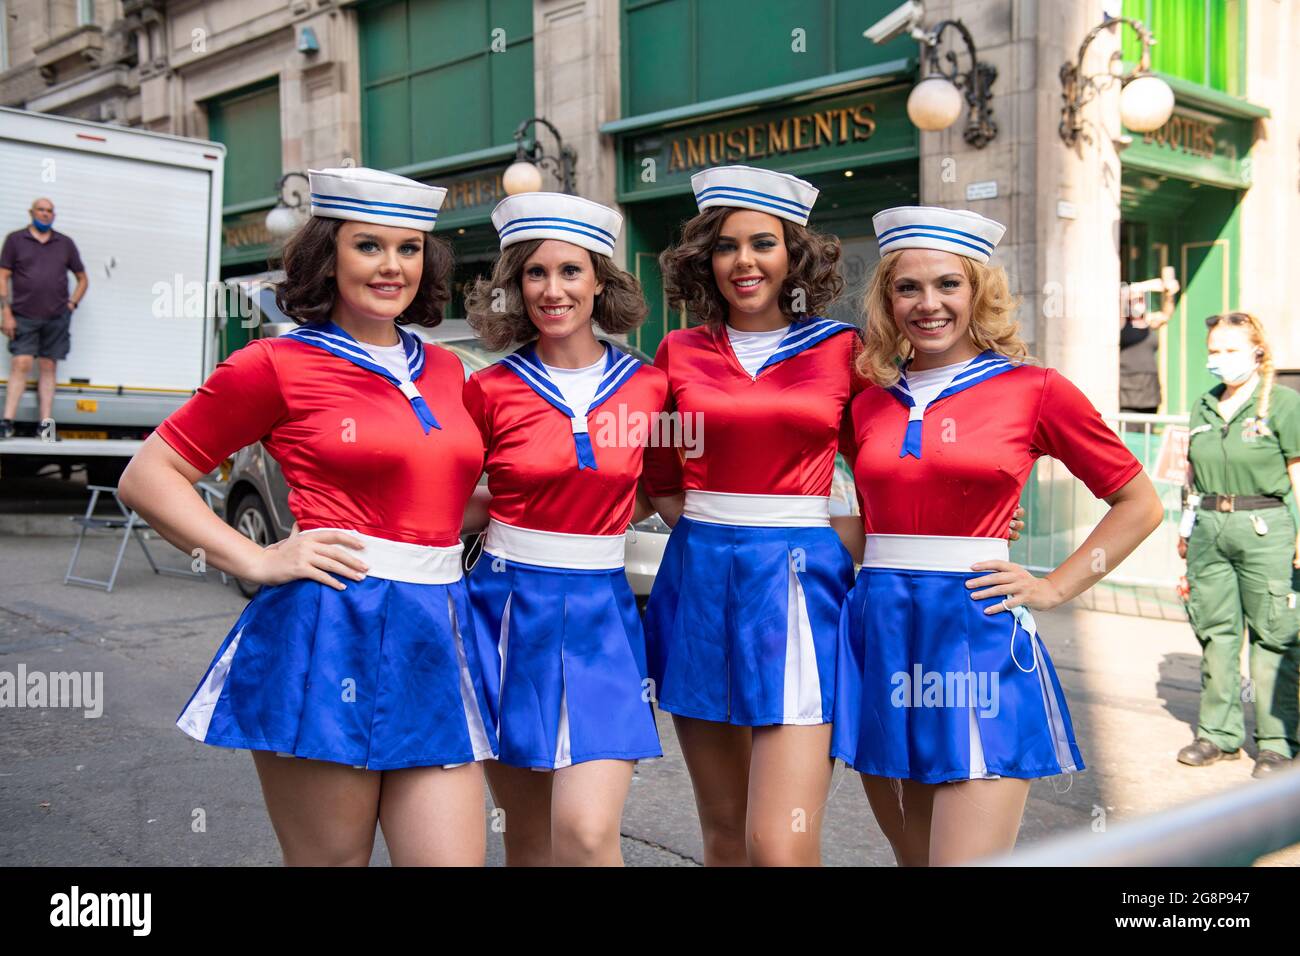 Glasgow, Scotland, UK. 21 July 2021.  PICTURED: A group of cheerleaders seen taking a break in between takes on the film set. Filming on the set of Indiana Jones 5 in the middle of Glasgow city centre as the Hollywood blockbuster sets up Glasgow as New York City. A full production can be seen, with a large cast, producers and extras. The city centre has been changed so that all the shop fronts and building look like 1959 America. Credit: Colin Fisher Stock Photo